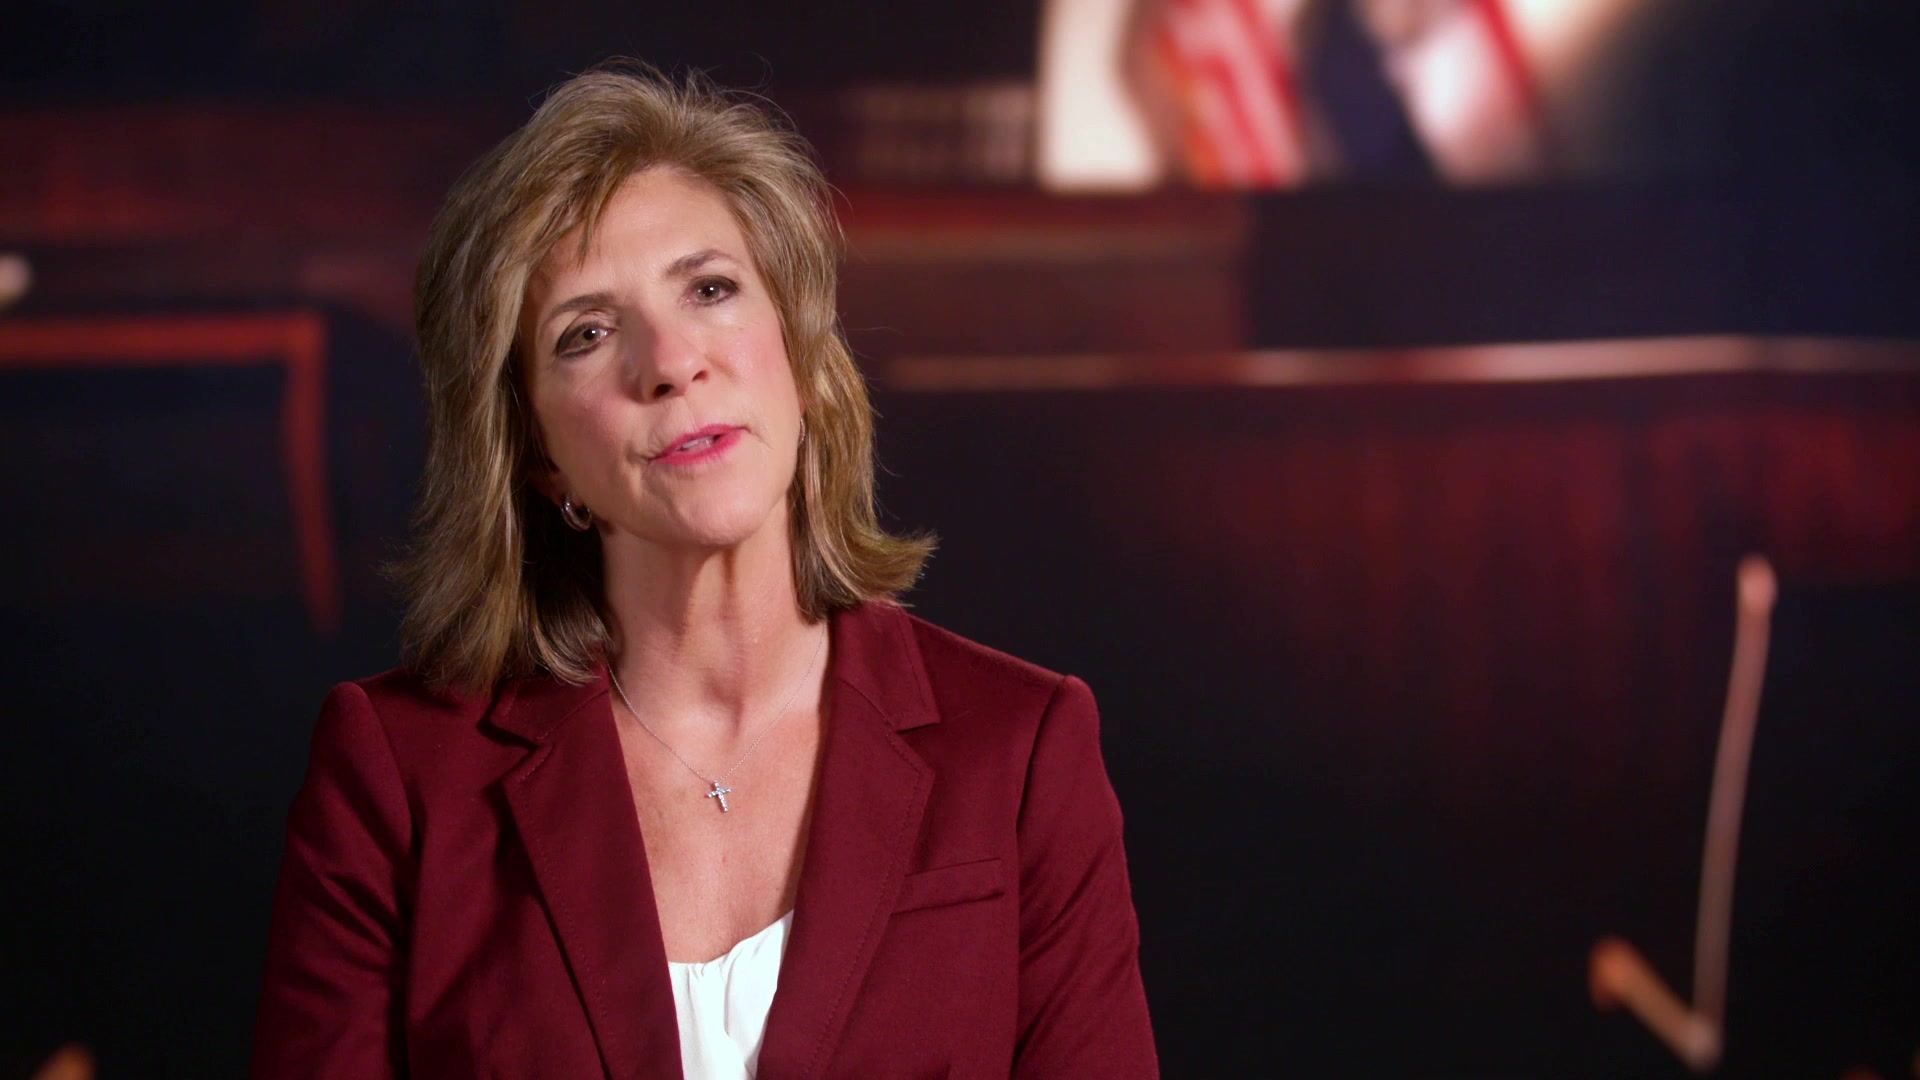 Watch Cold Justice Sneak Peek Get a Look at Kelly Siegler in Action to